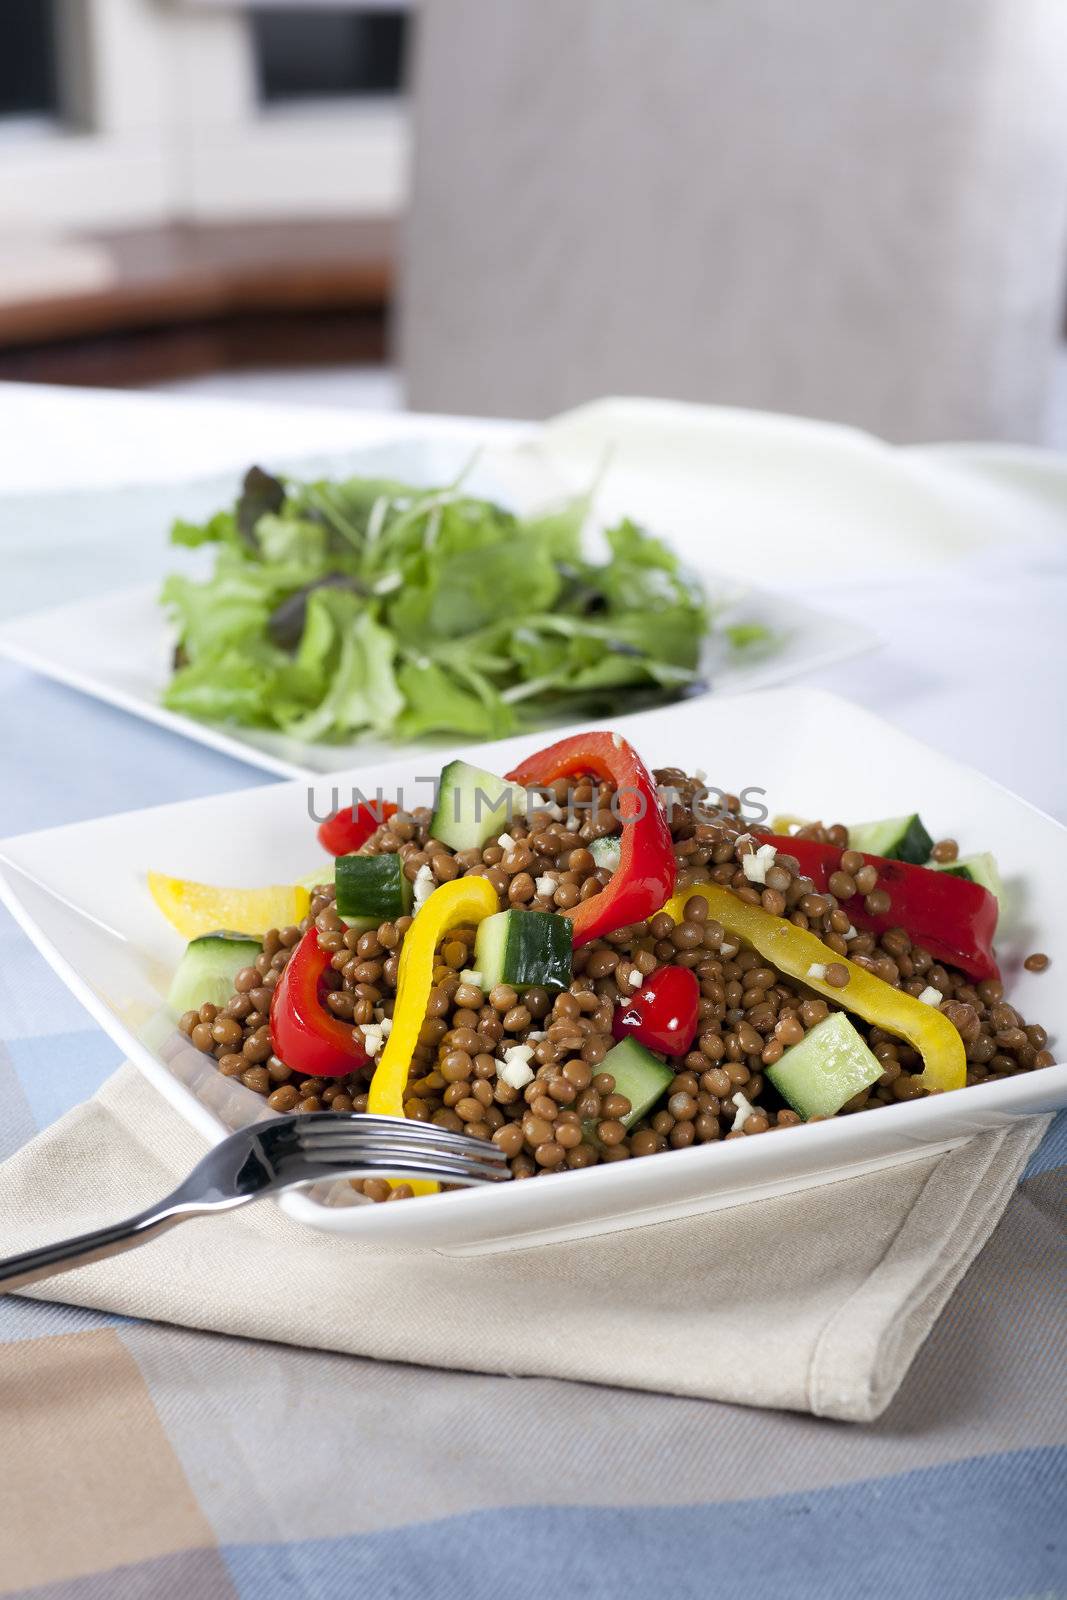 Fresh and healthy vegetarian lentil salad with red and yellow peppers.